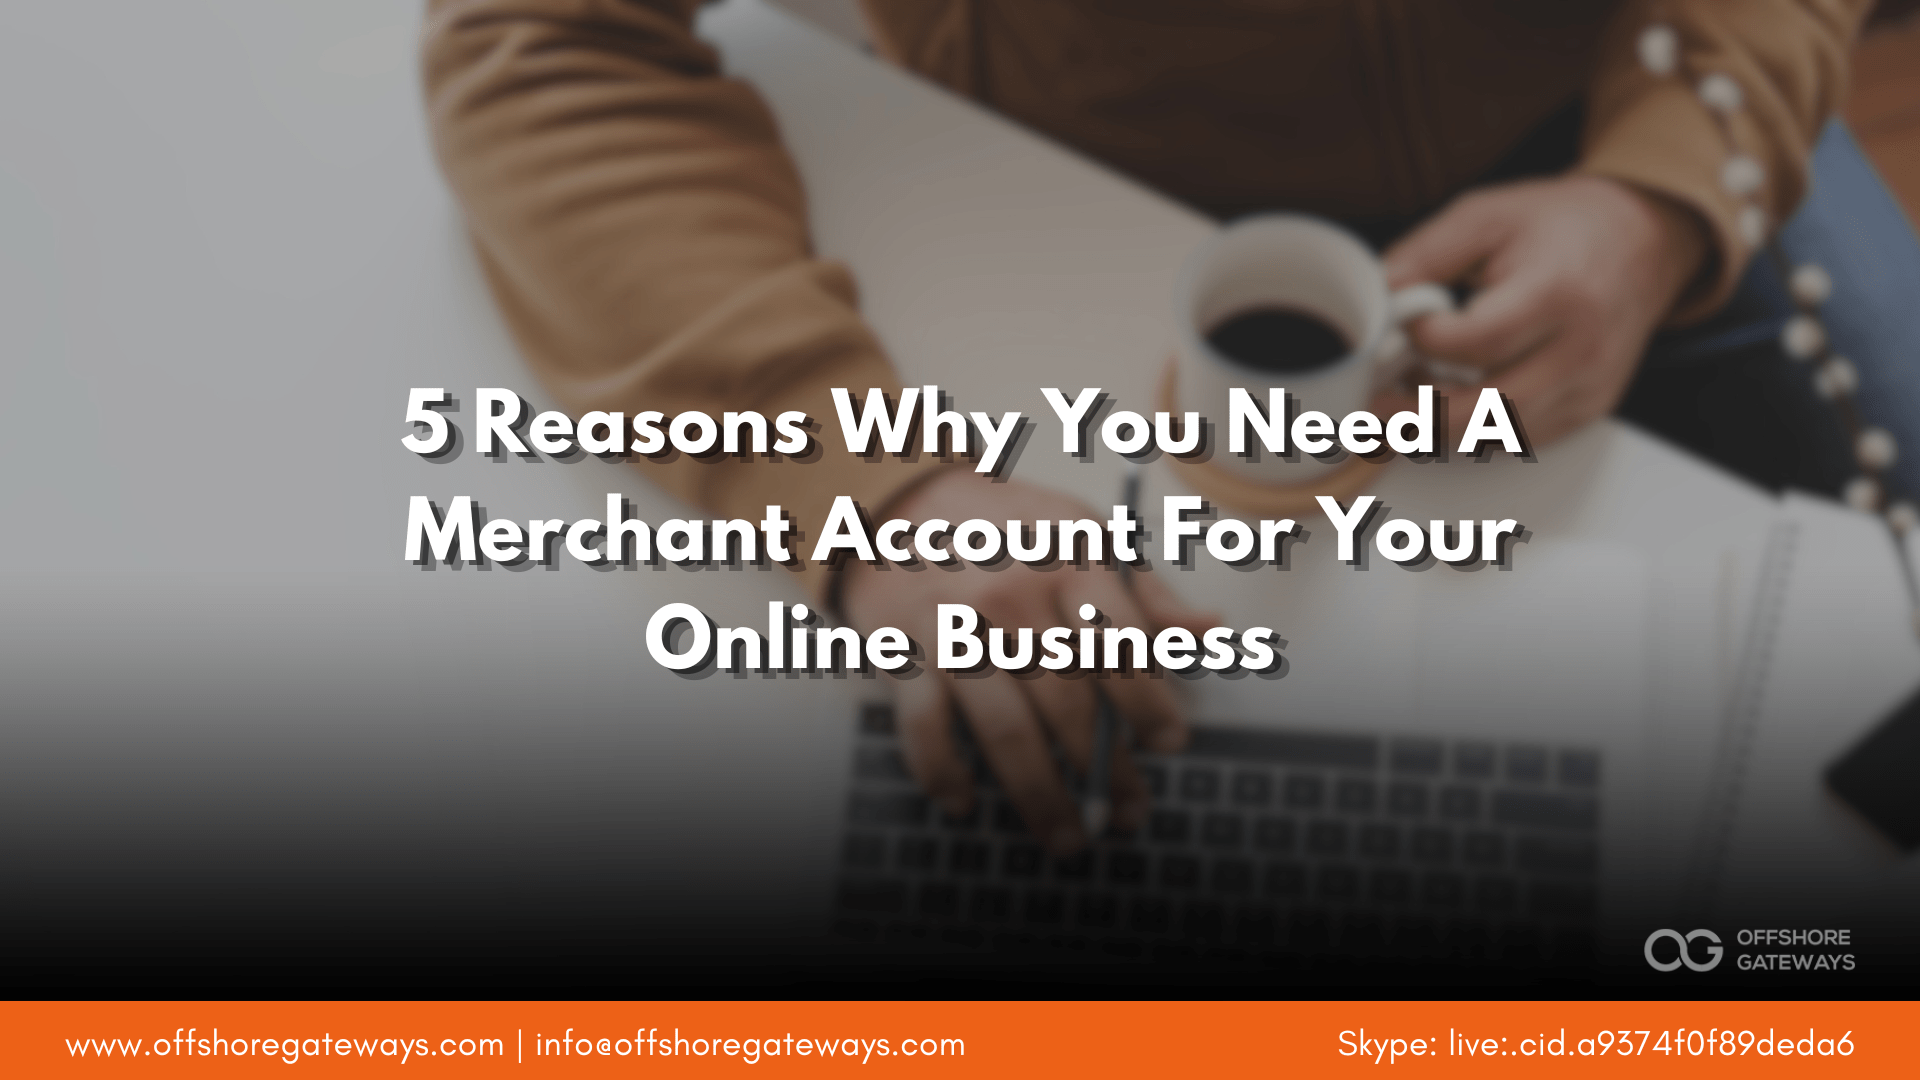 5-reasons-why-you-need-a-merchant-account-for-your-online-business-offshoregateways